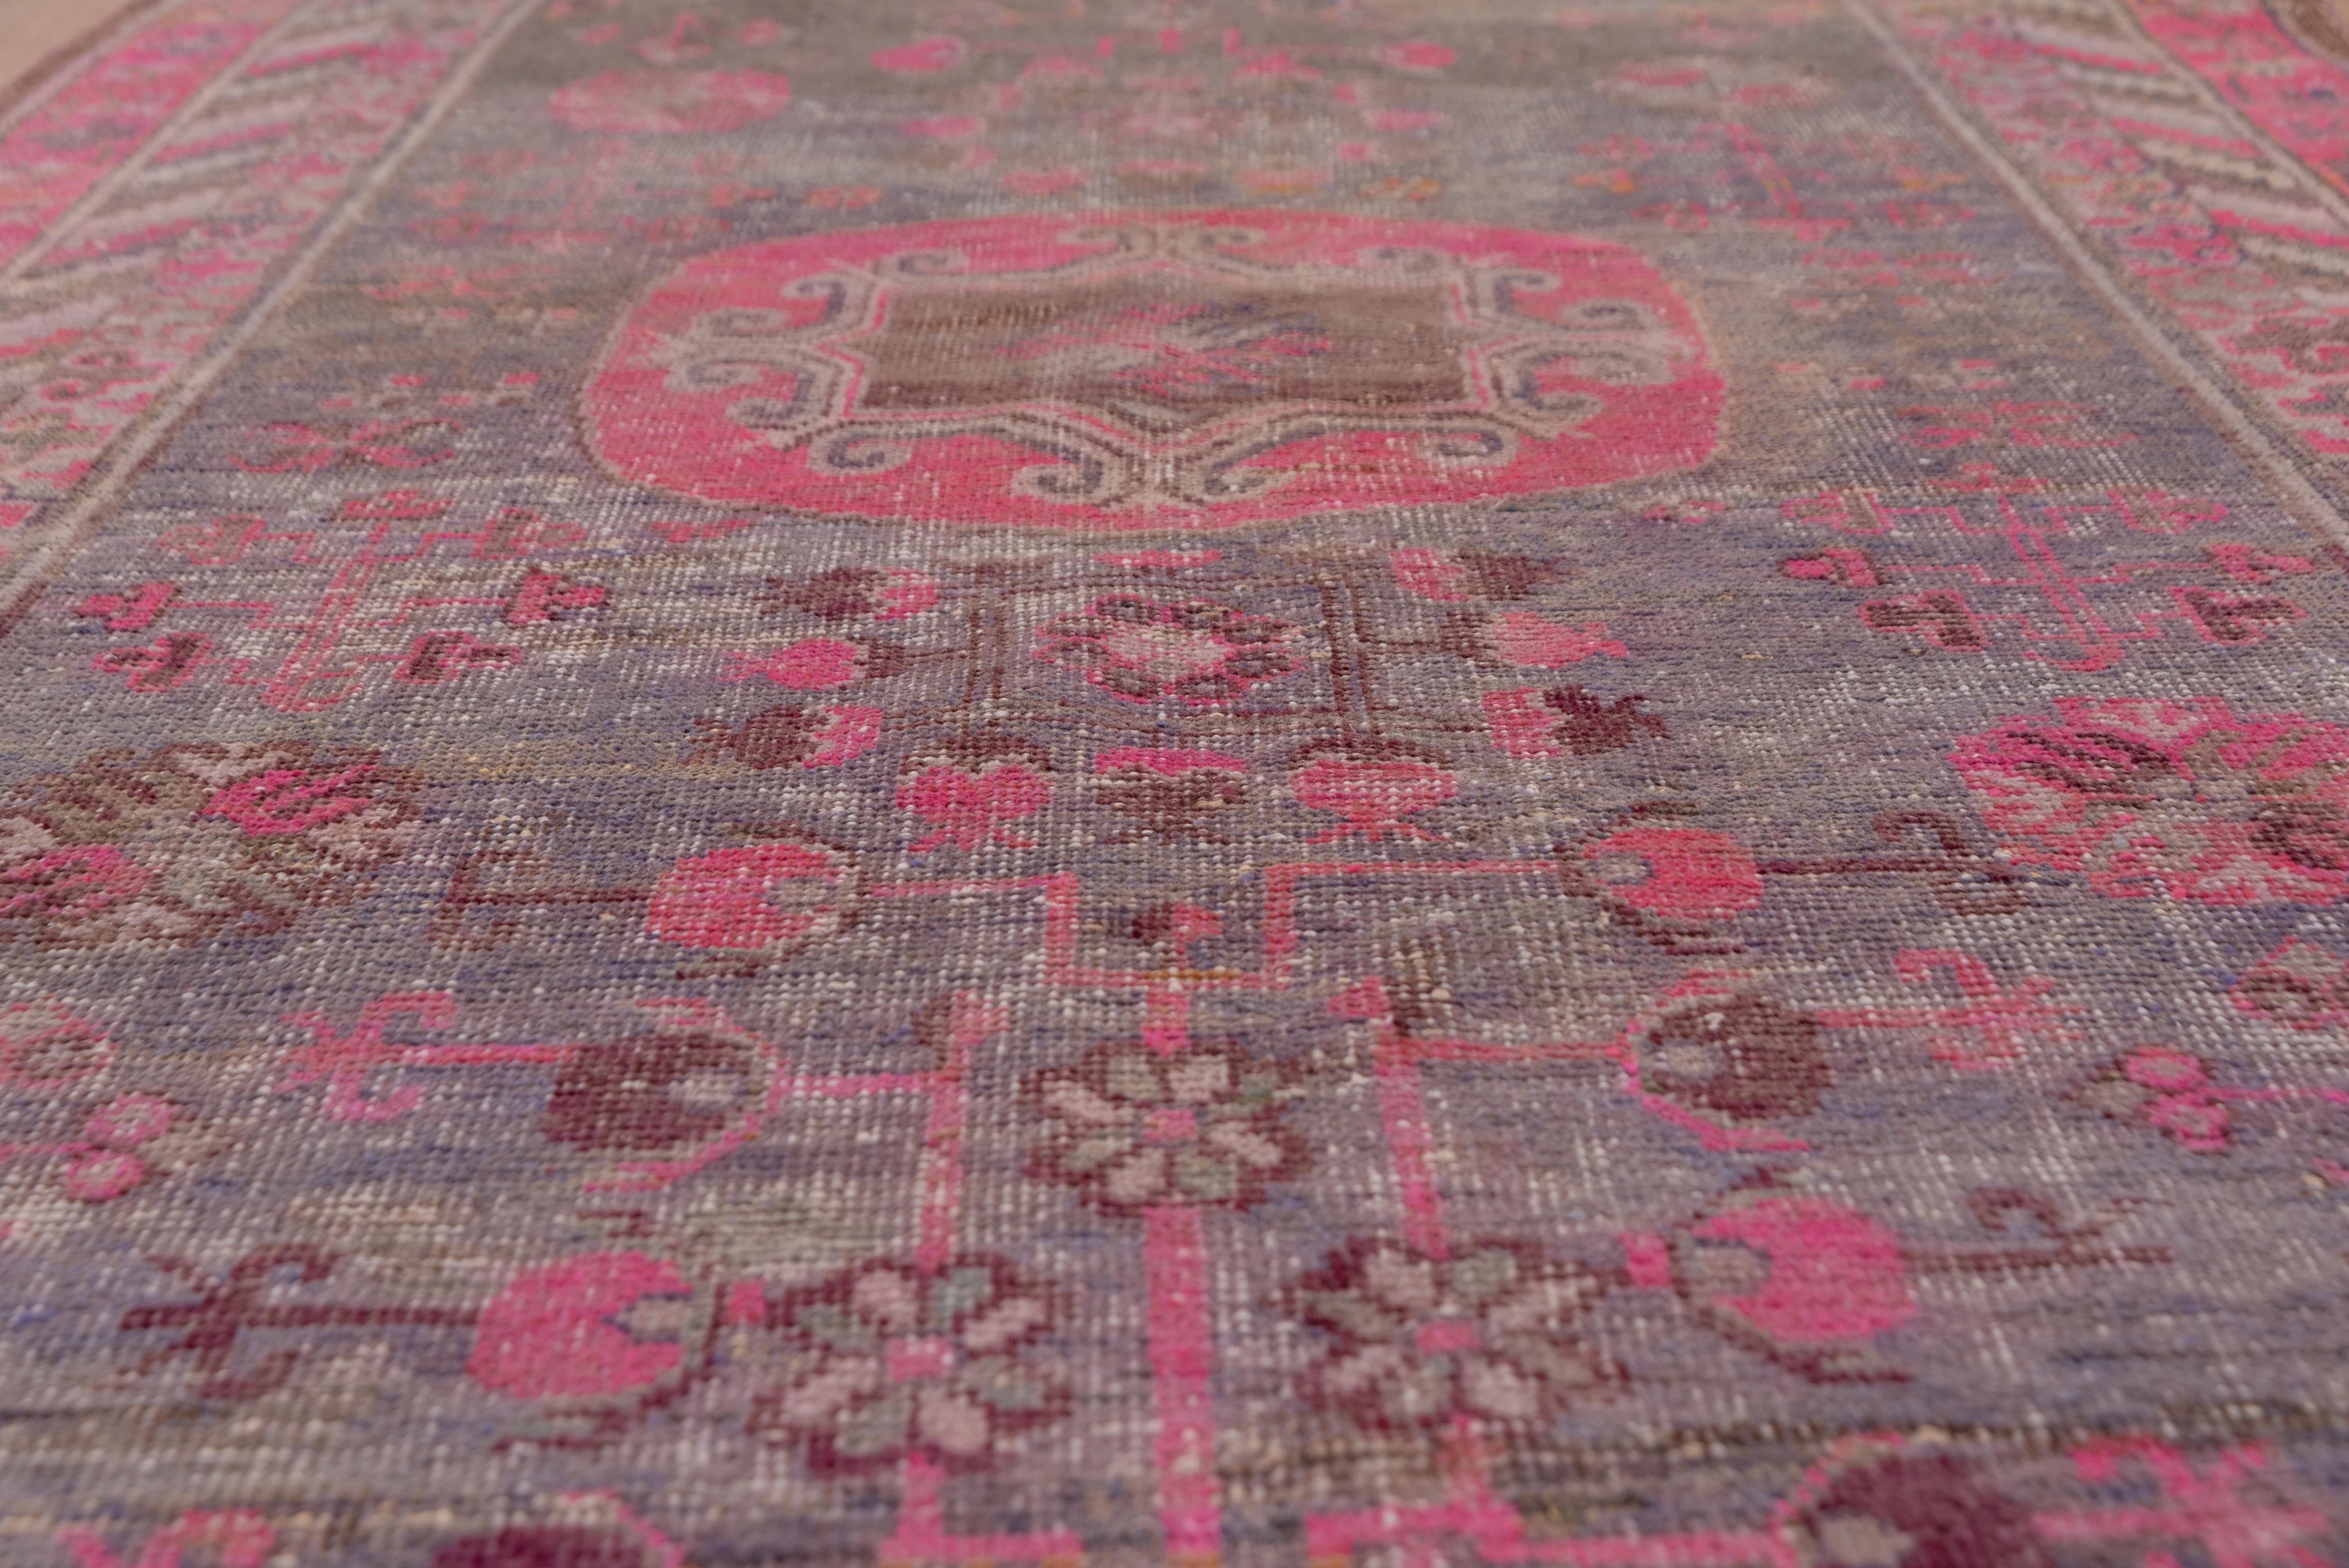 Early 20th Century Colorful Antique Khotan Rug, Purple Pink and Orange Tones For Sale